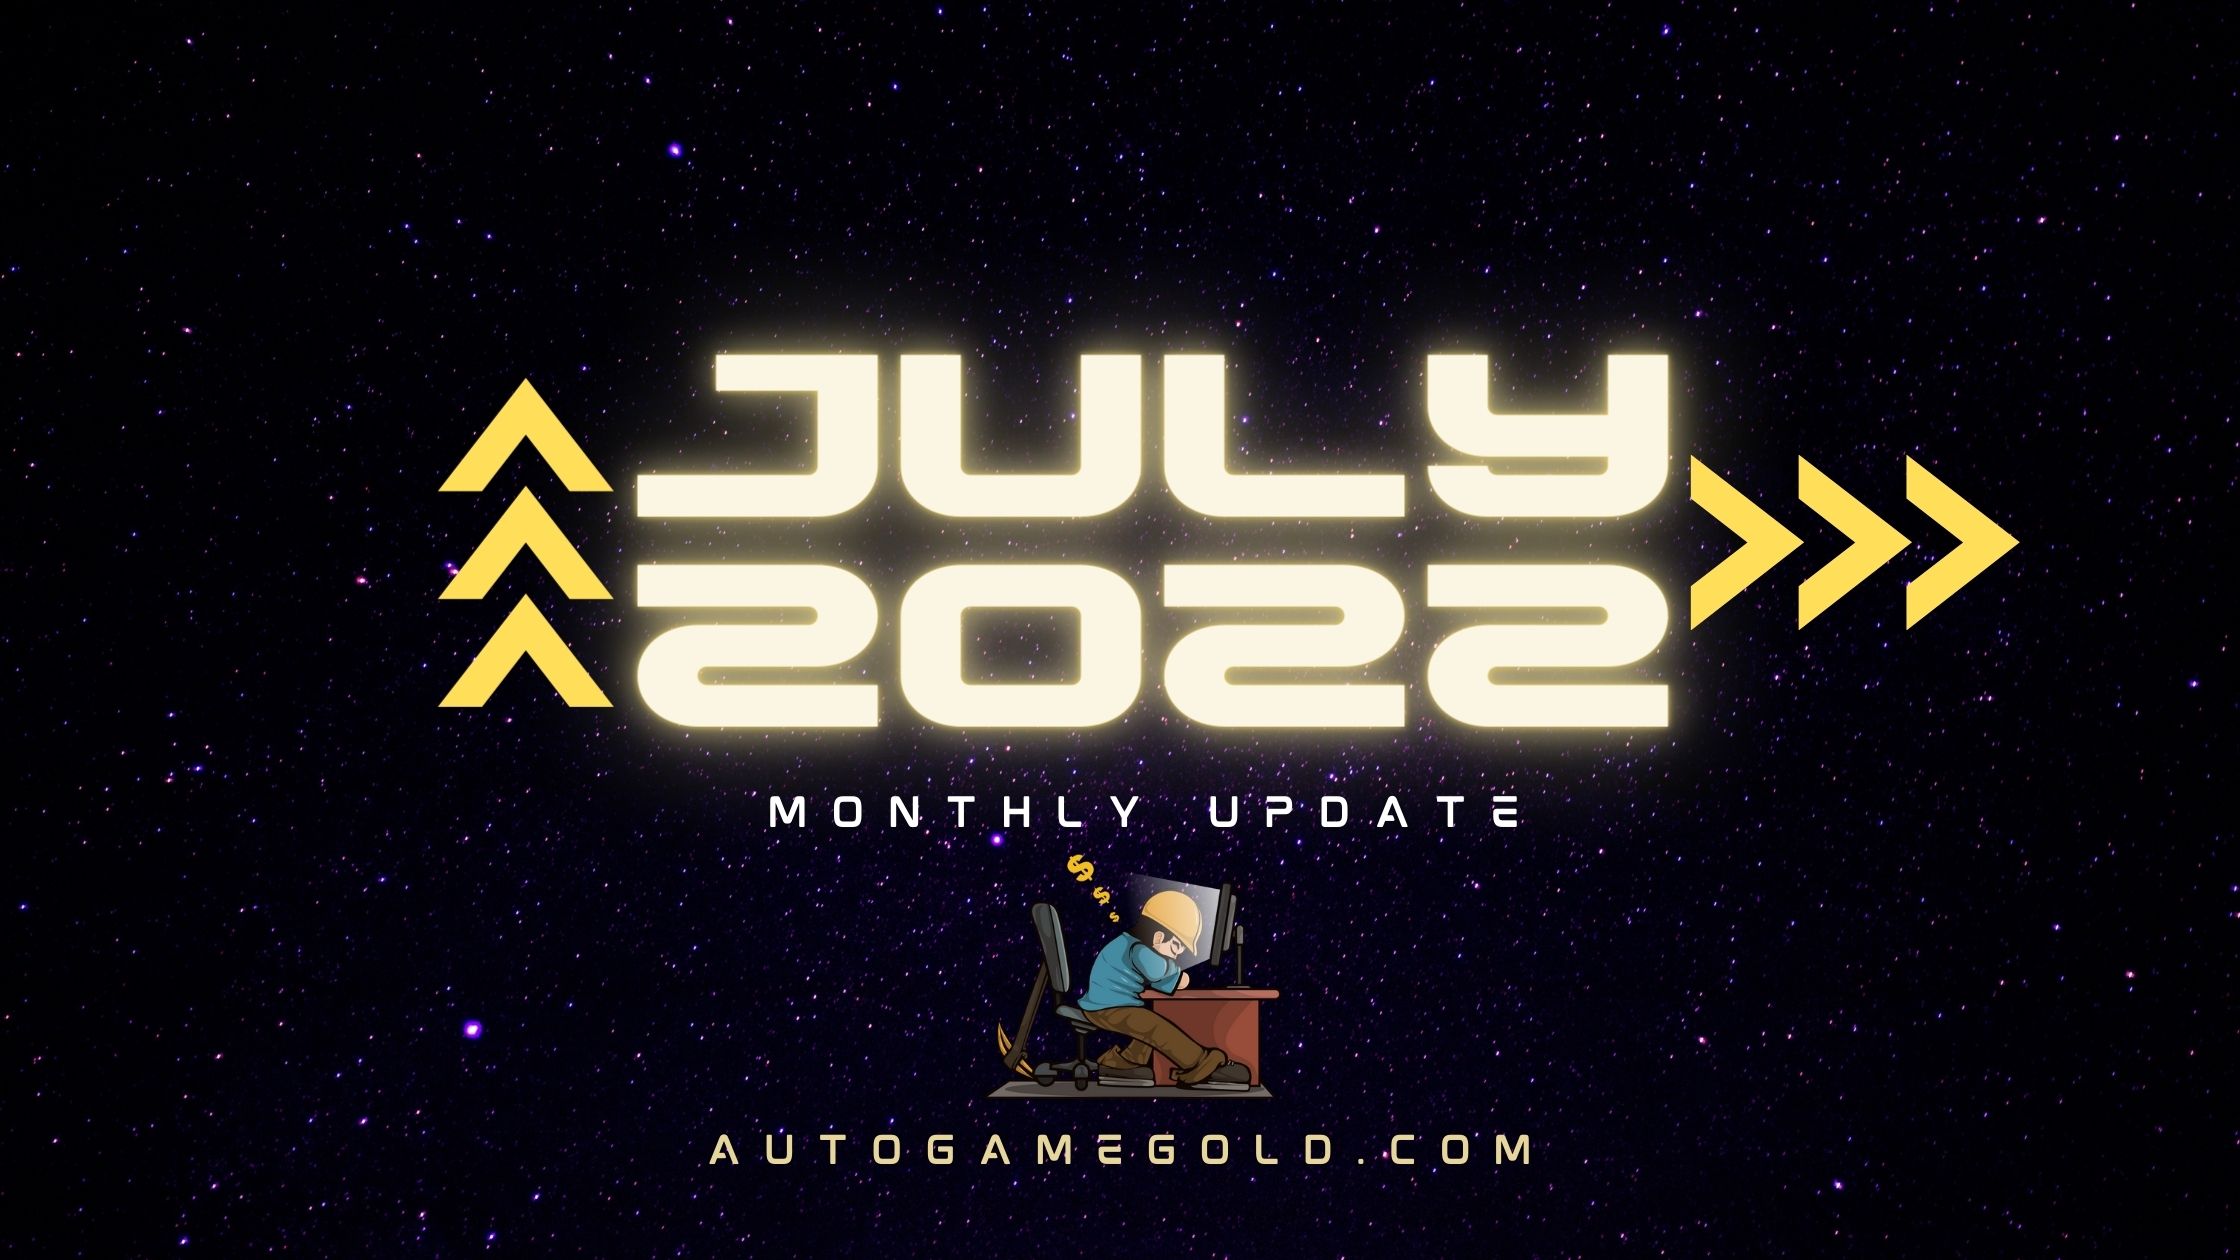 Monthly Update - July 2022